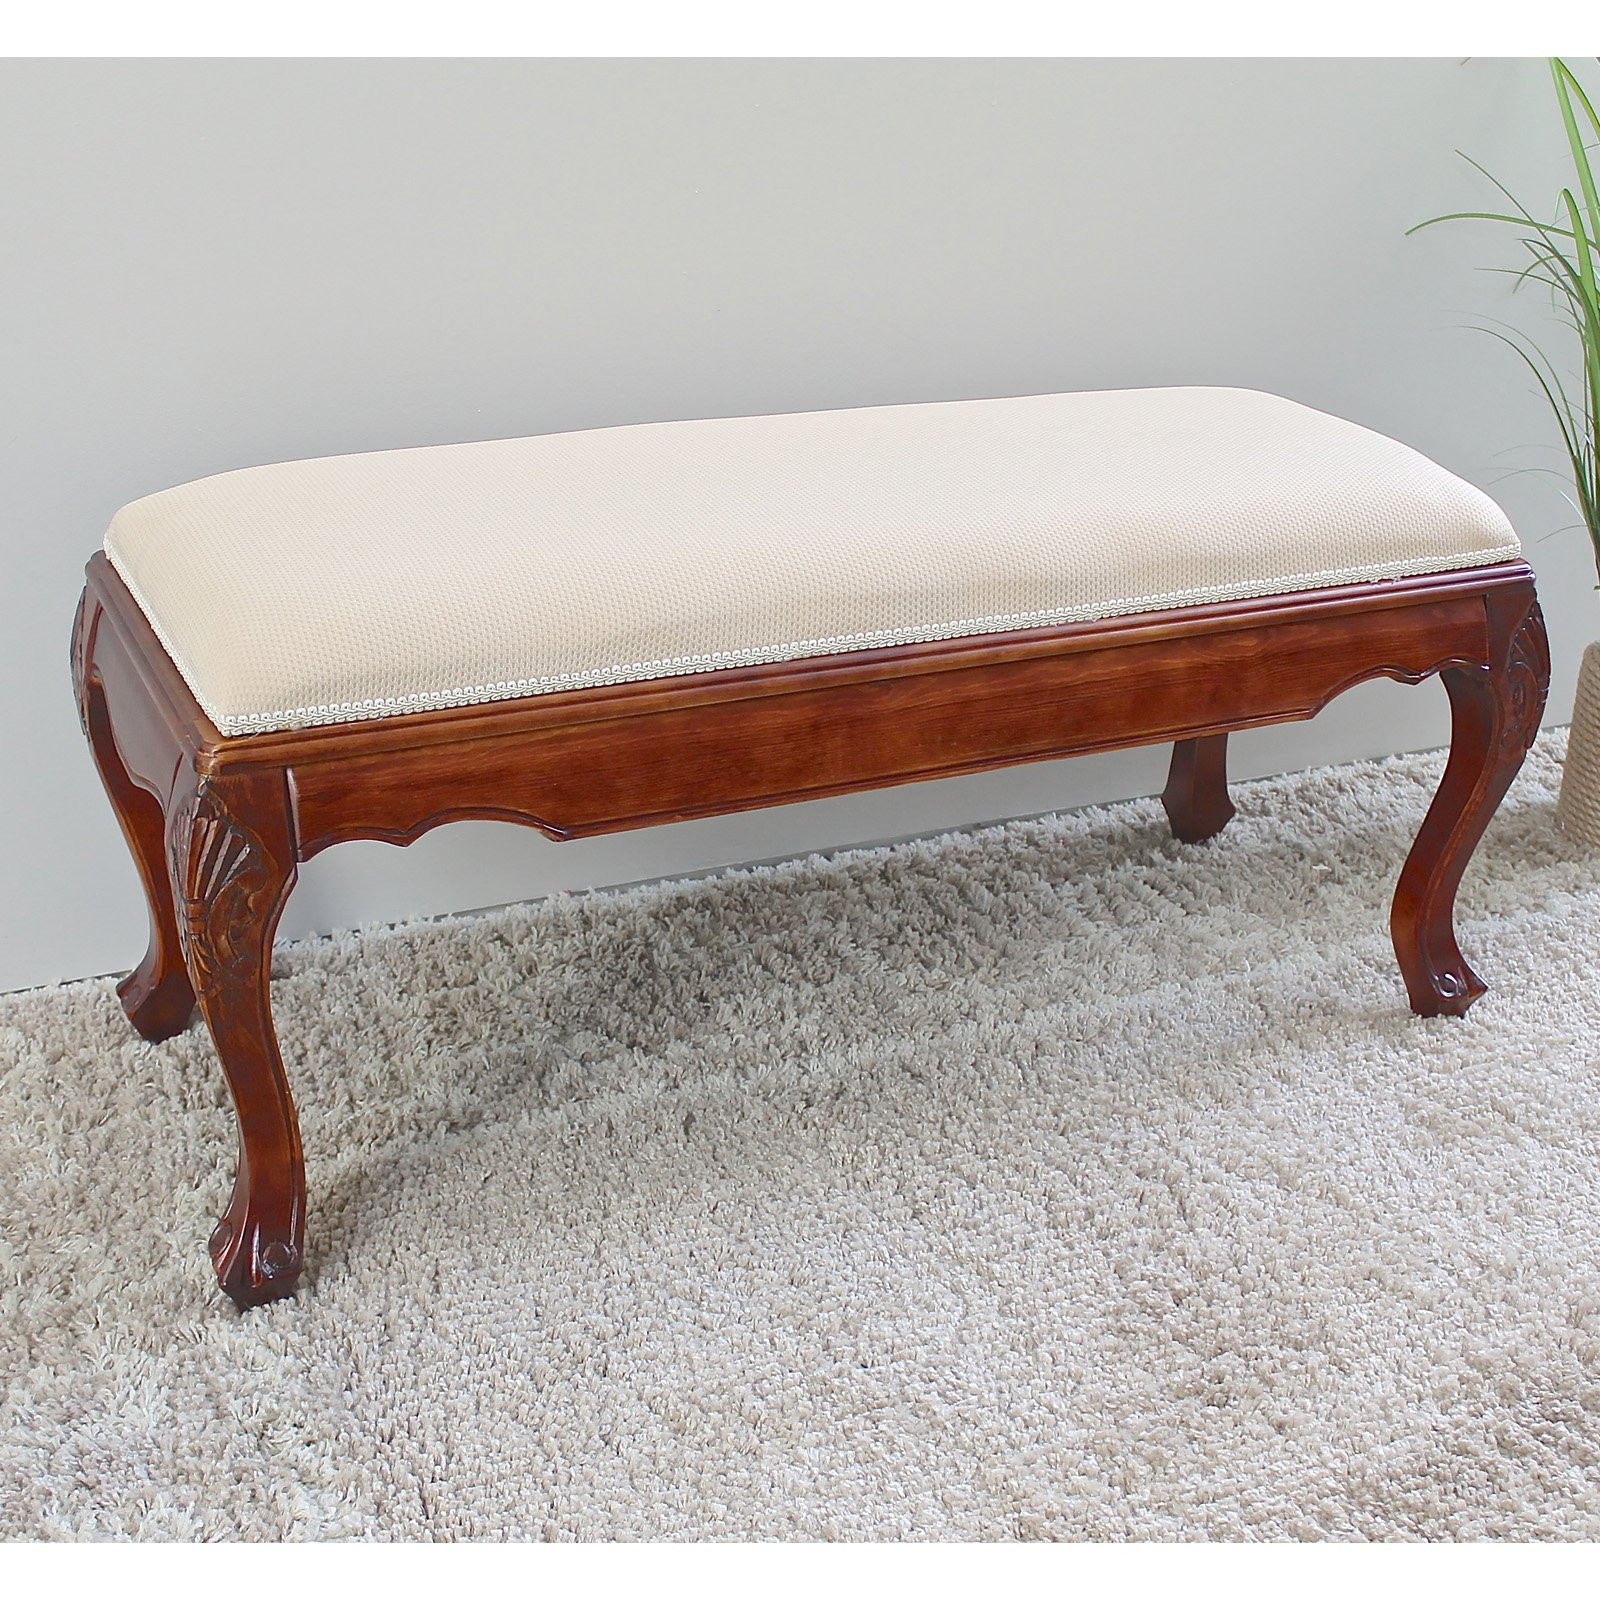 Sitting Bench With Storage
 Bed Foot Bench Storage Bedroom Entryway Sitting Seat